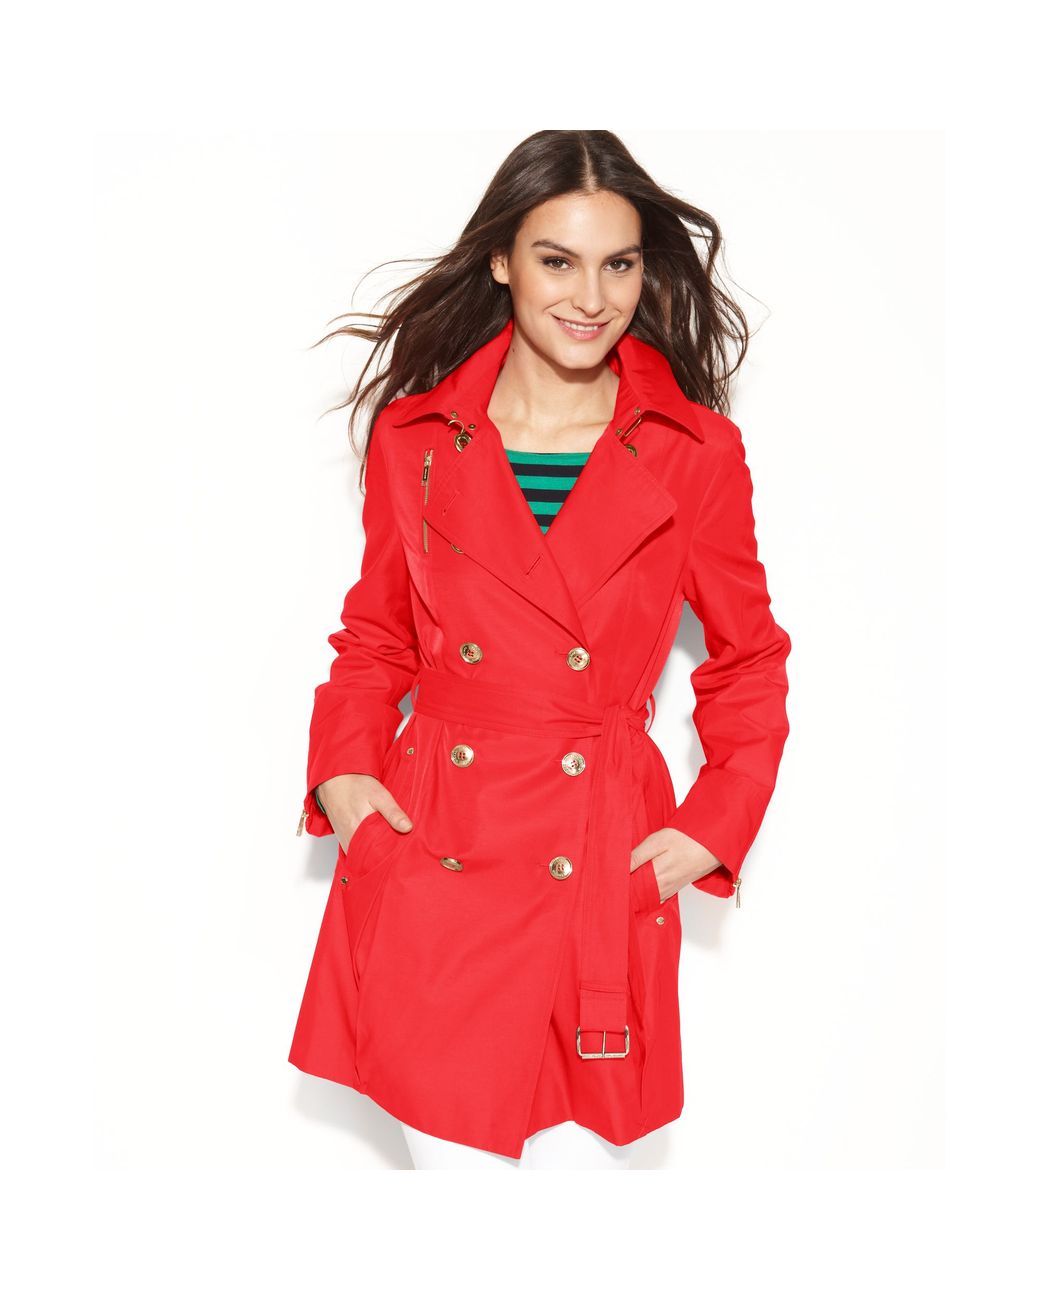 MICHAEL Michael Kors Stretch Cotton Chain Cord Anorak in Red